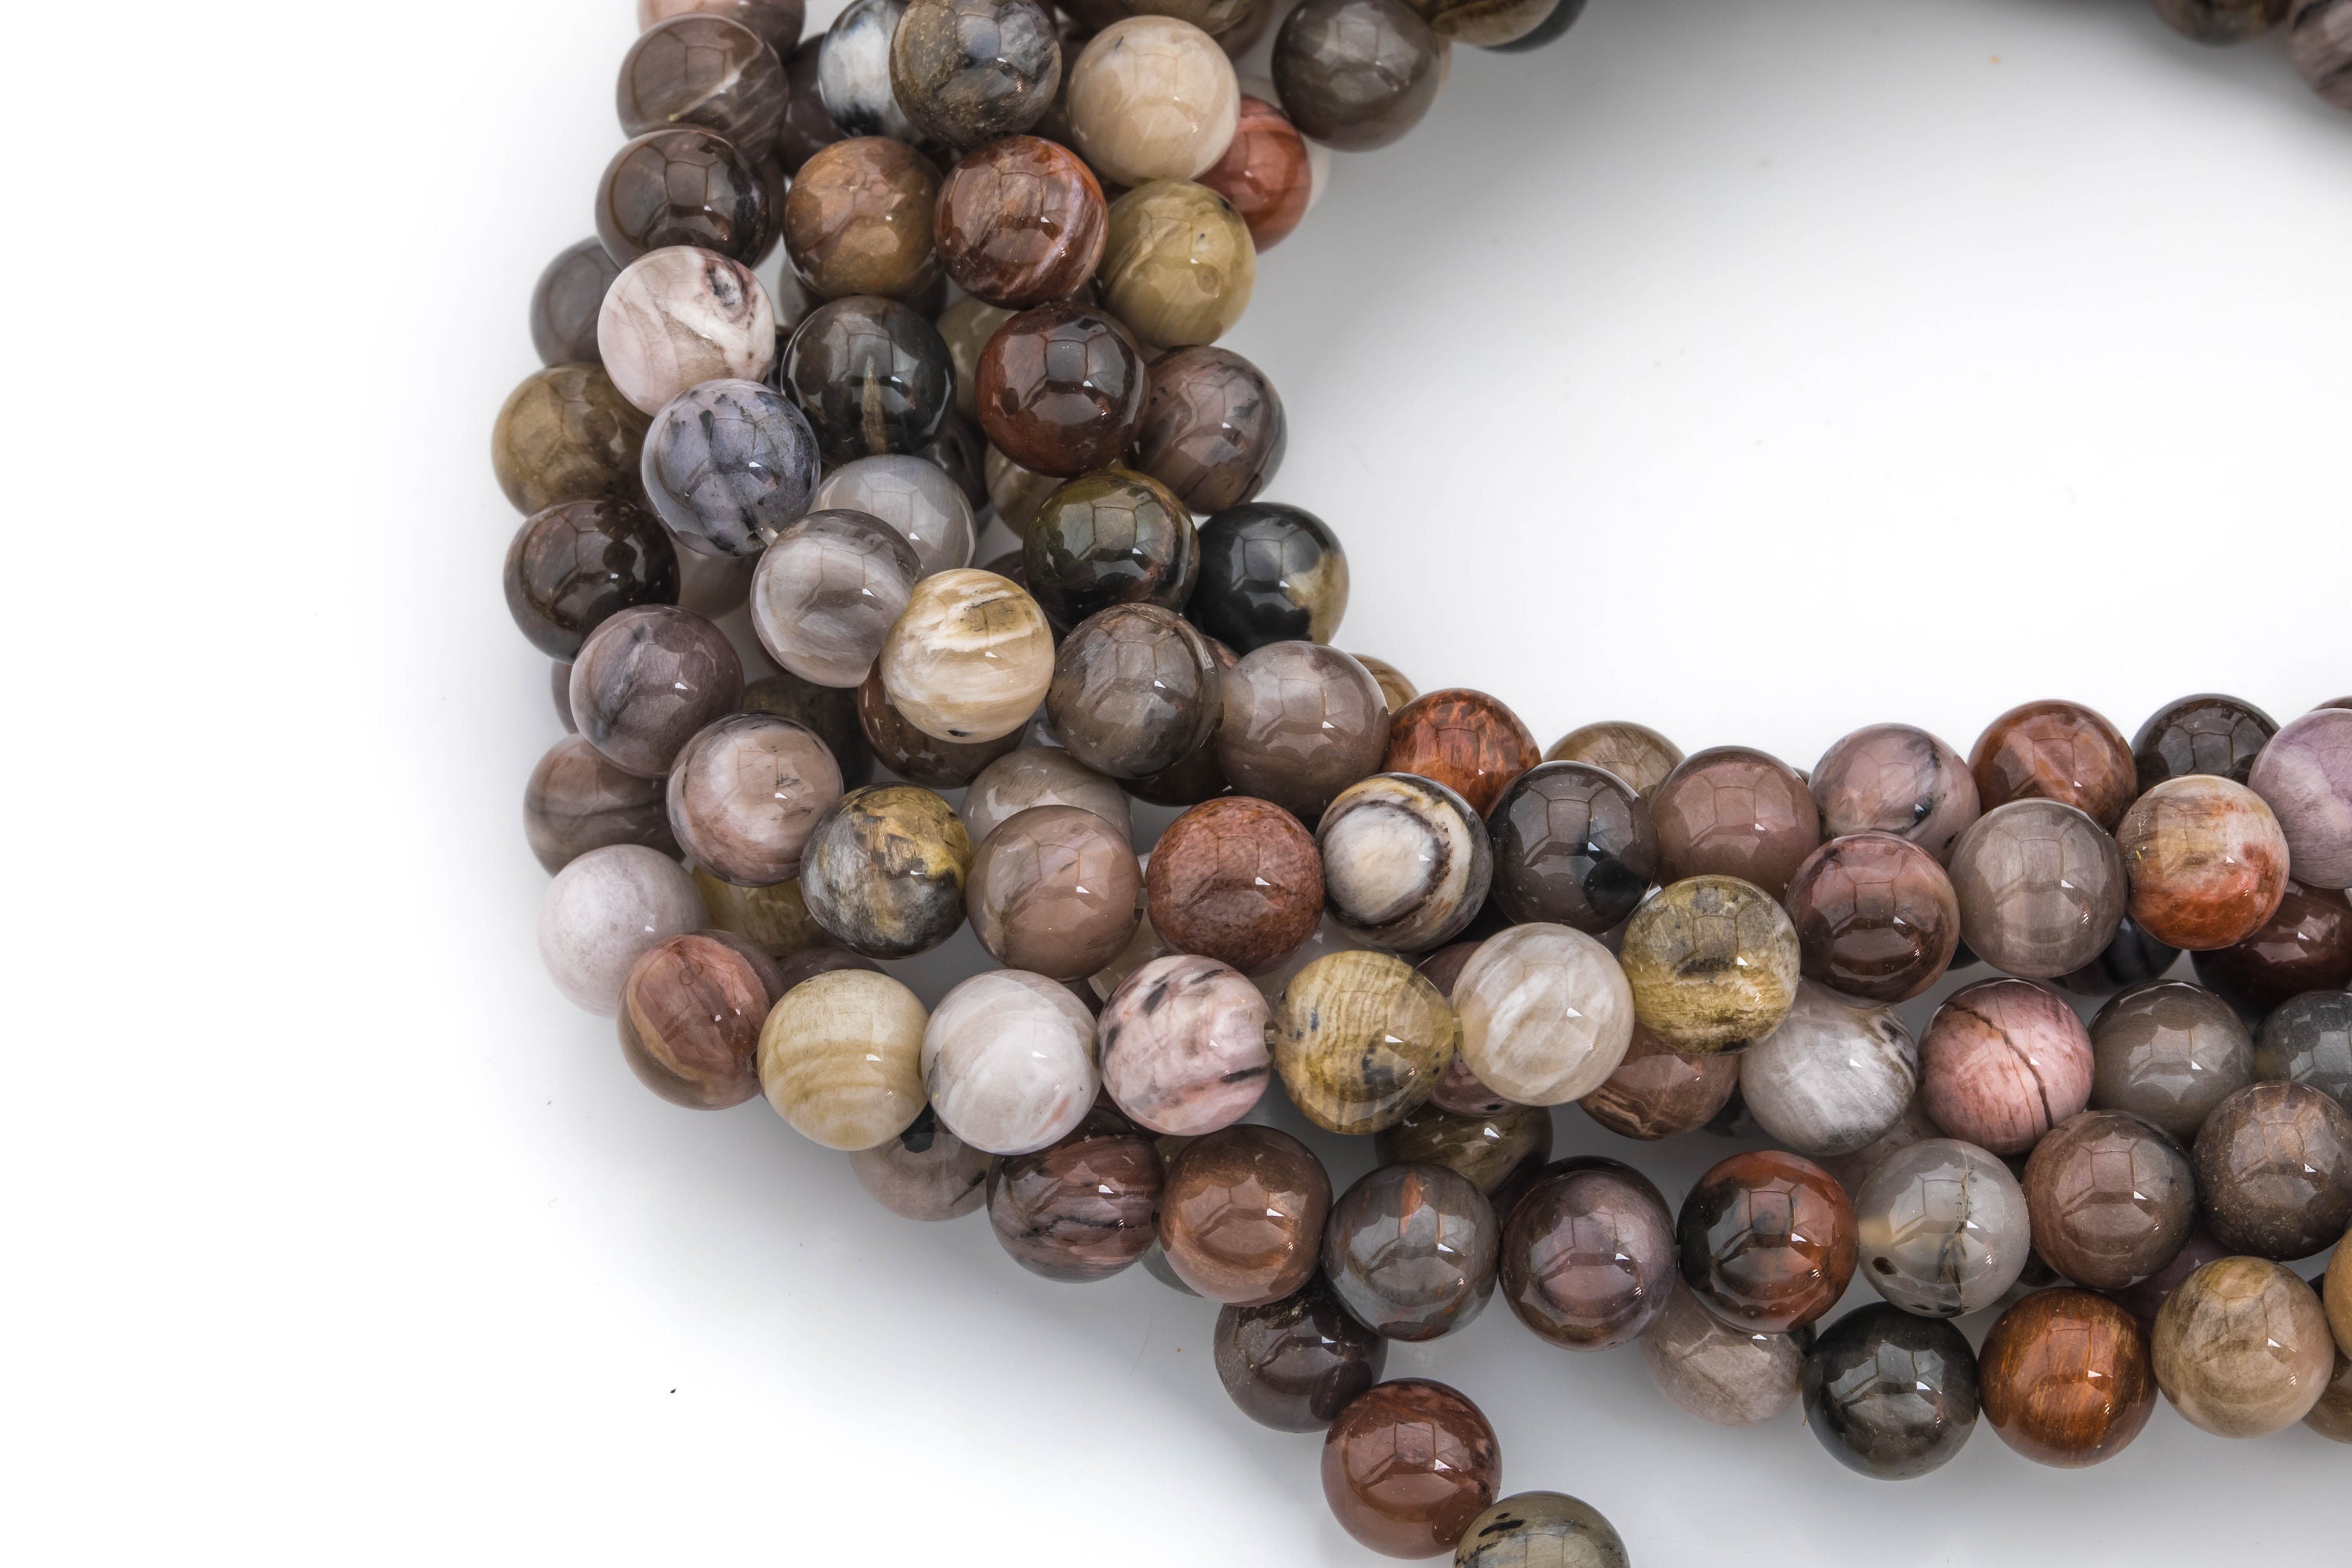 Petrified Wood Bead Bracelet with Silver Spacers - 10mm